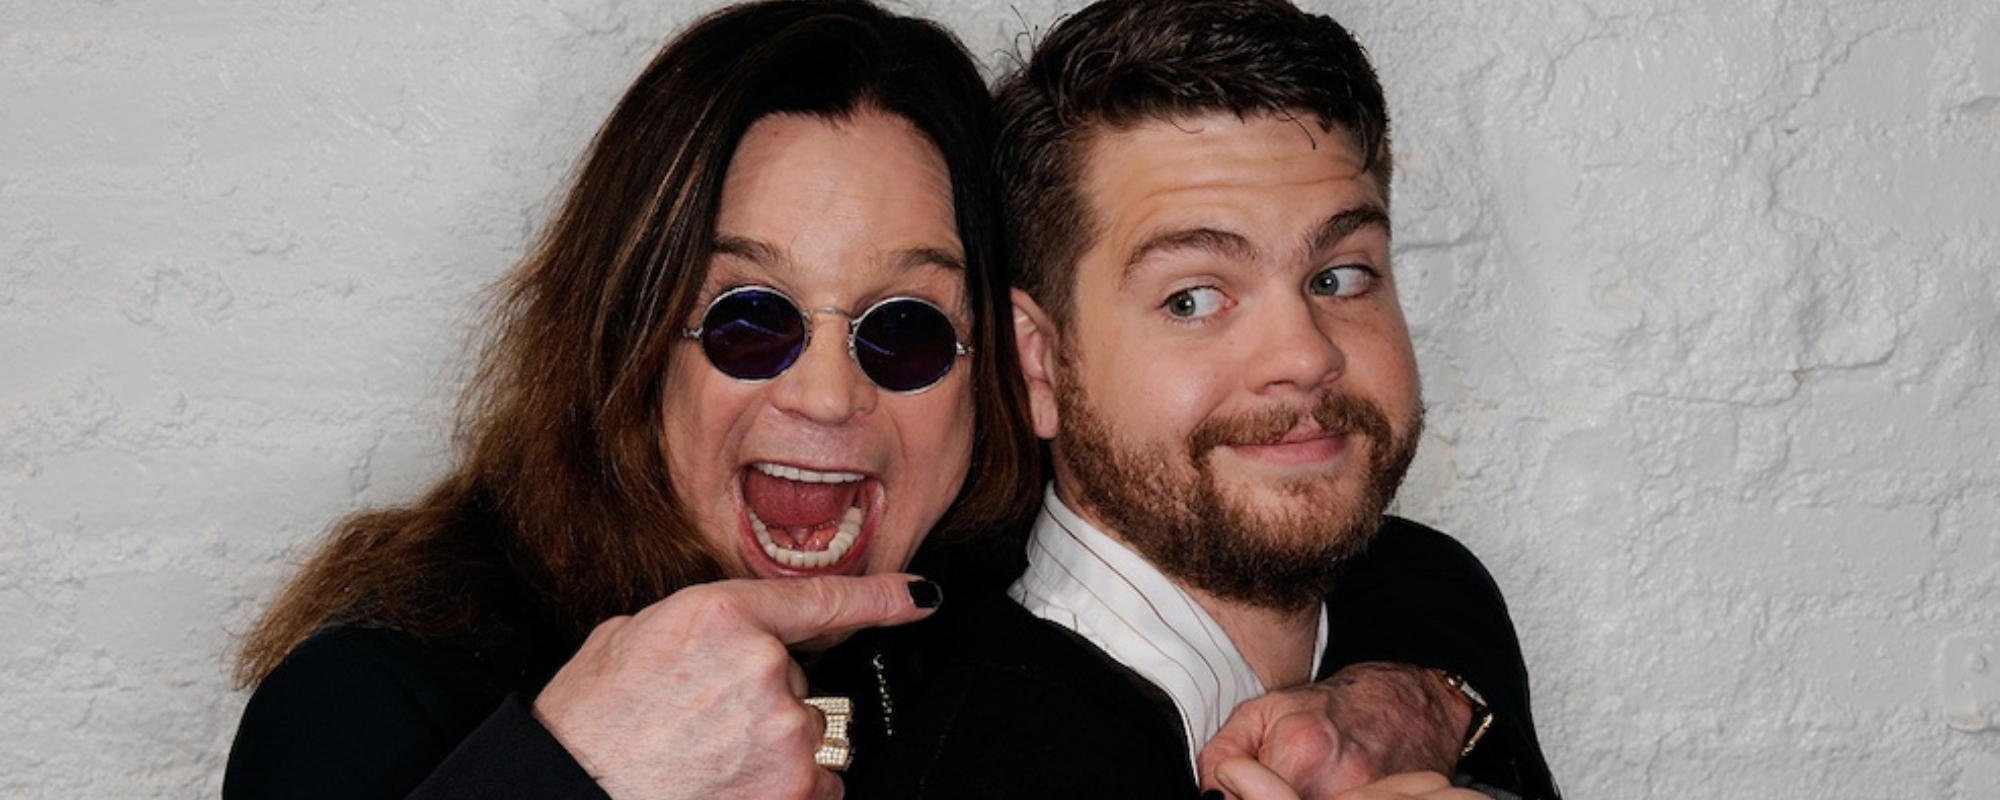 Jack Osbourne Says Ozzy Probably Won’t Tour Again, Wants to Do “One-Off Shows”